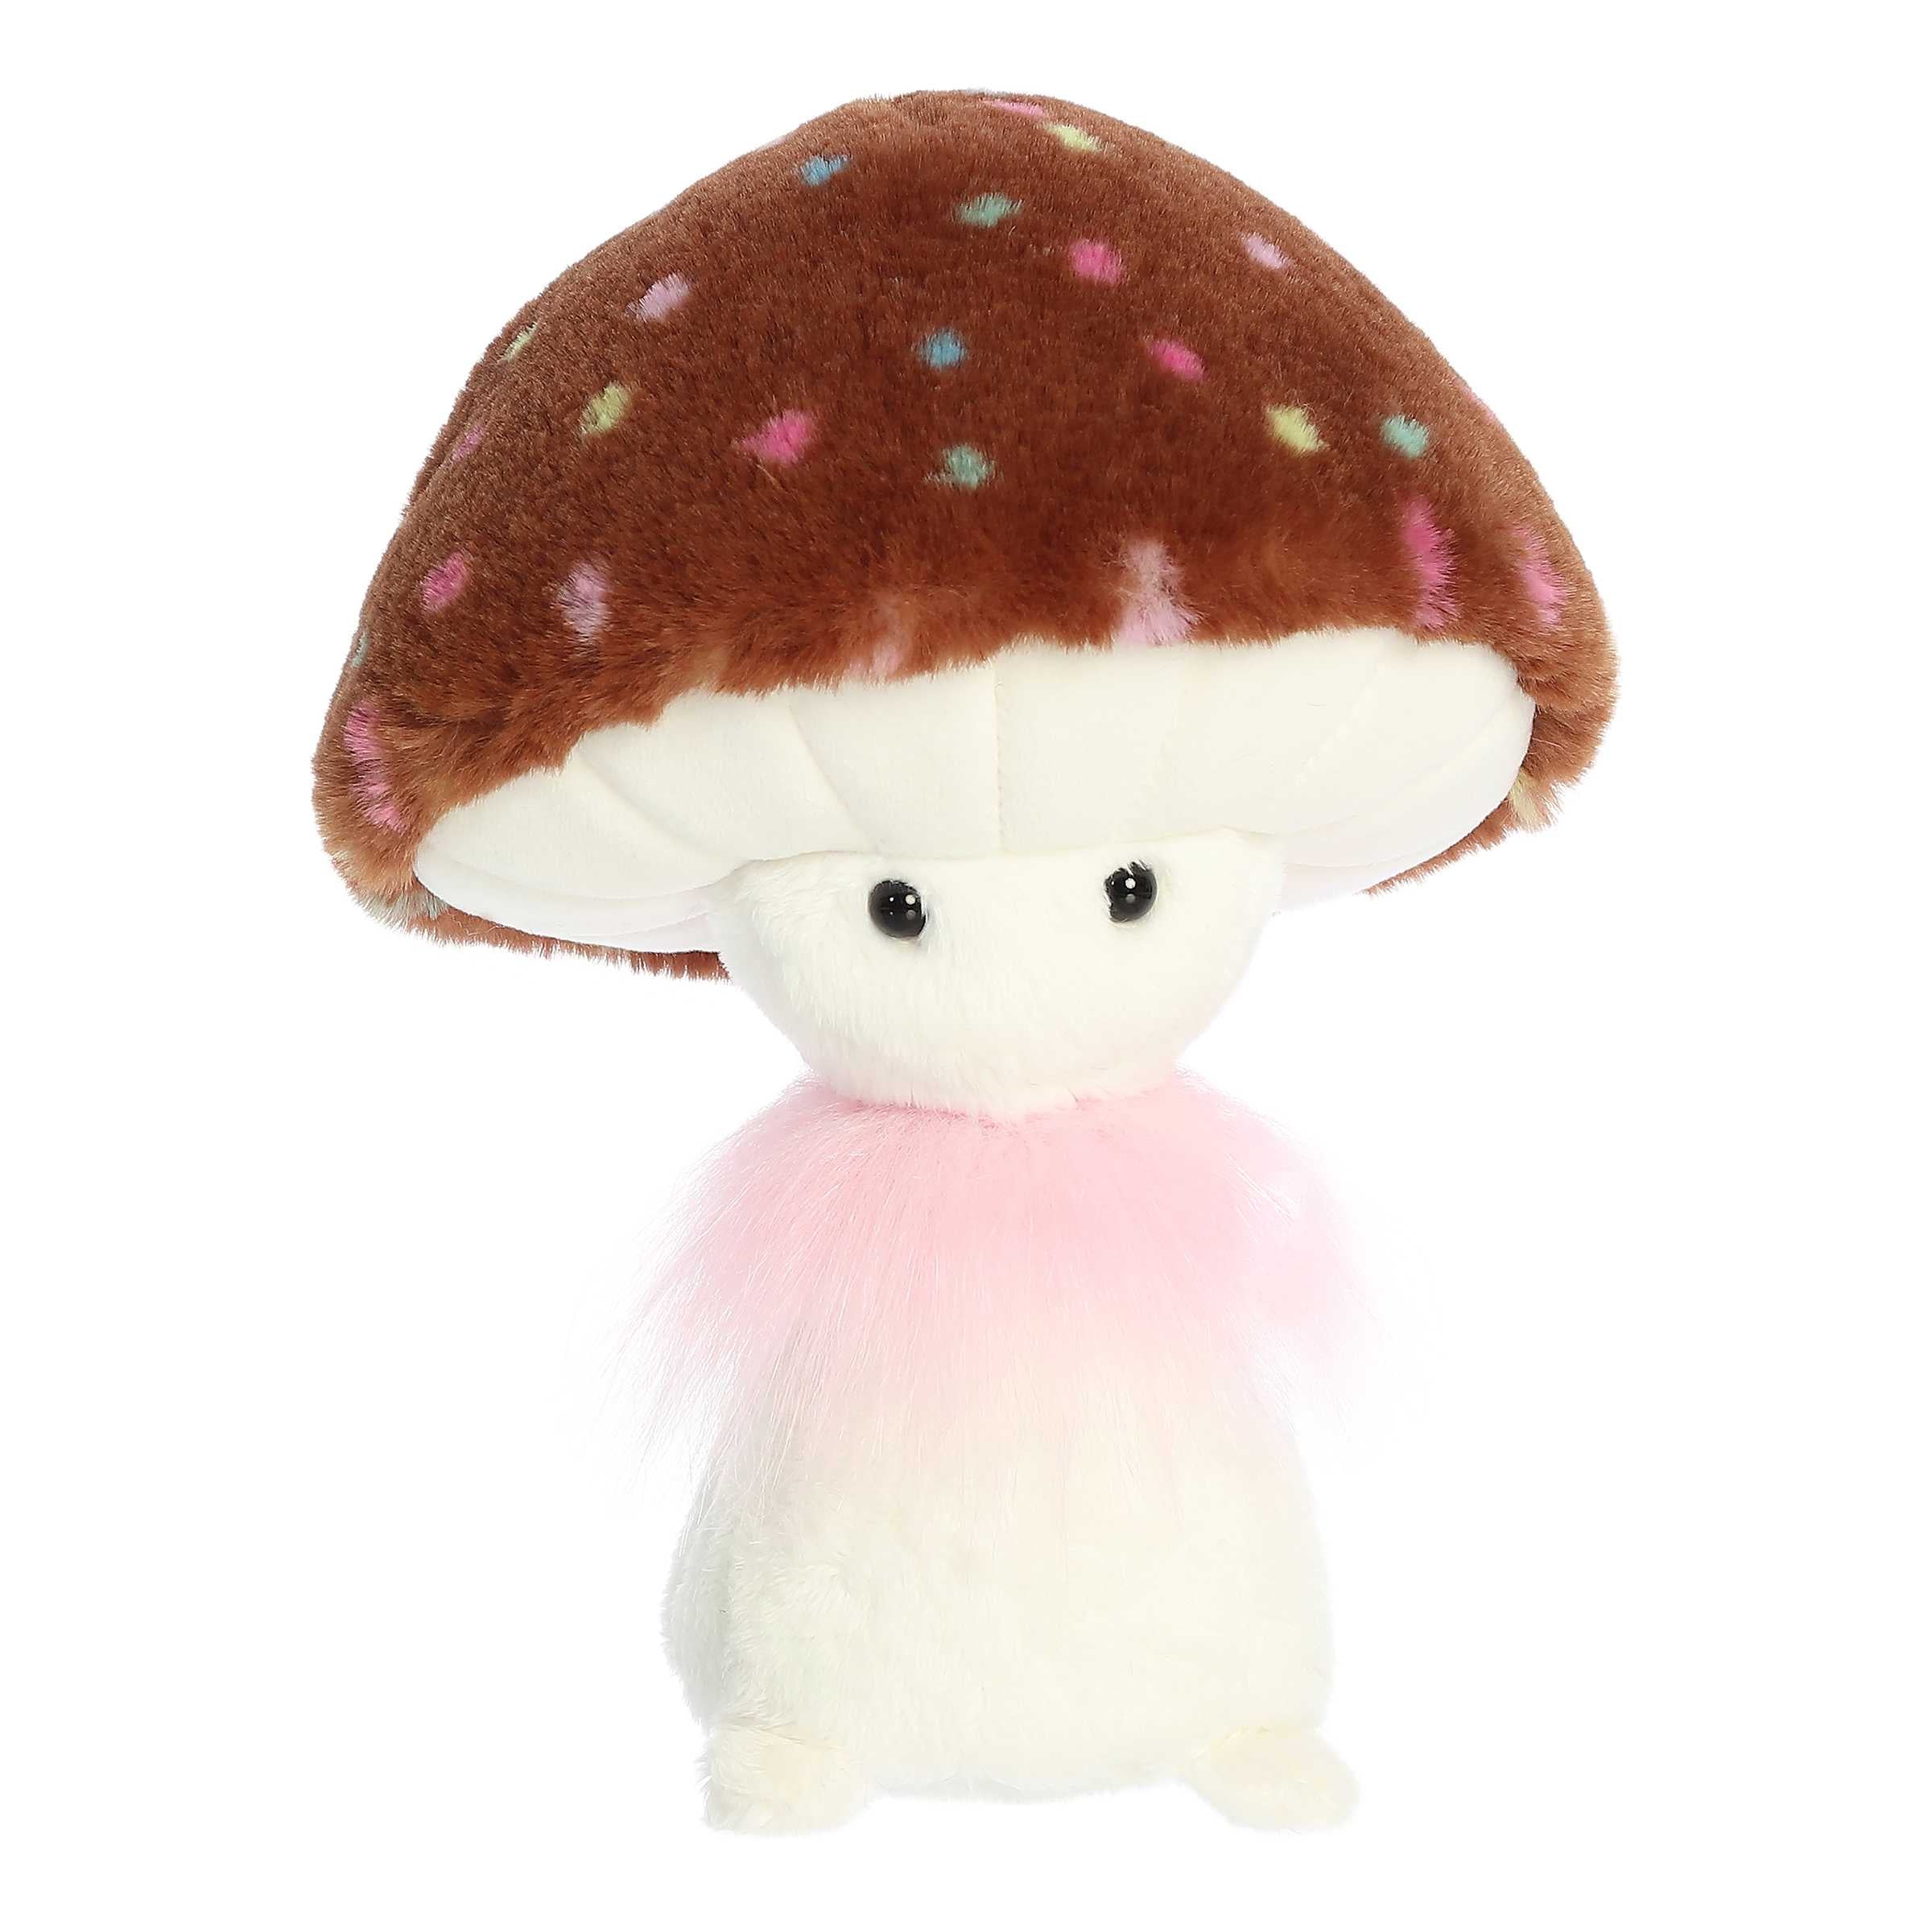 Vanilla Cupcake mushroom plush from Fungi Friends, with a colorful cap and pink frills!